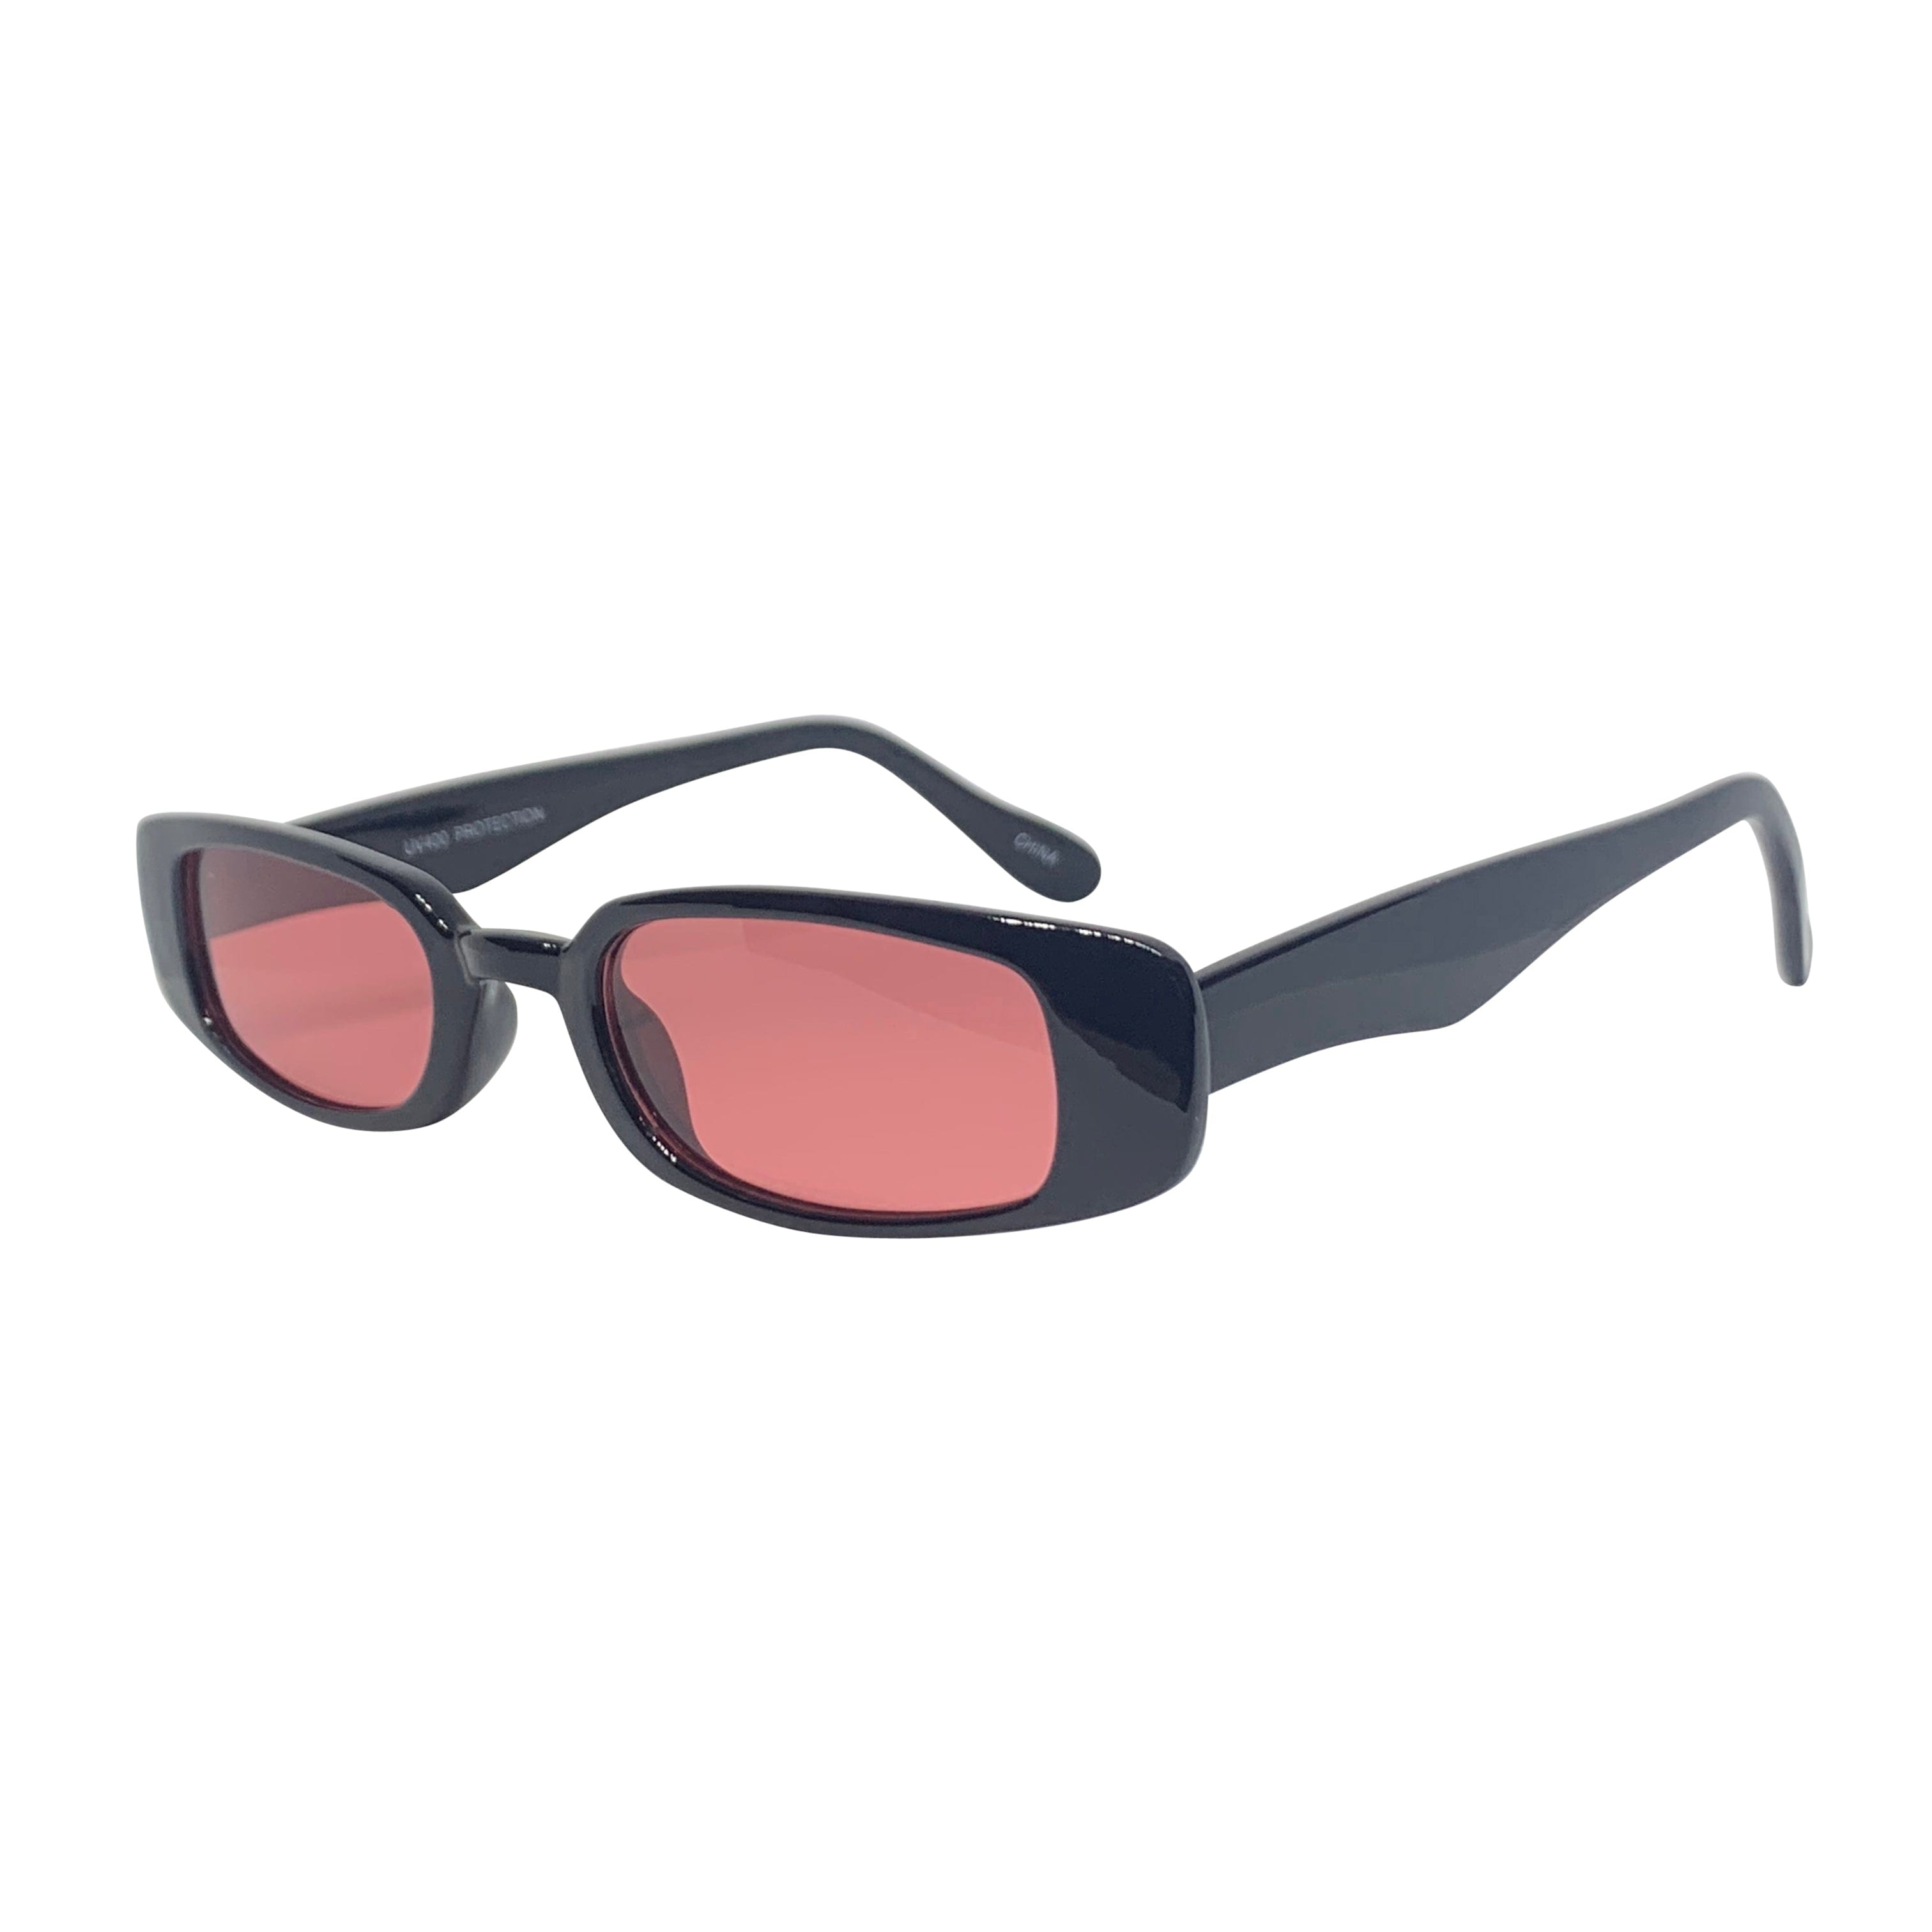 SKWAT Black and  Pink 90s Style Sunnies